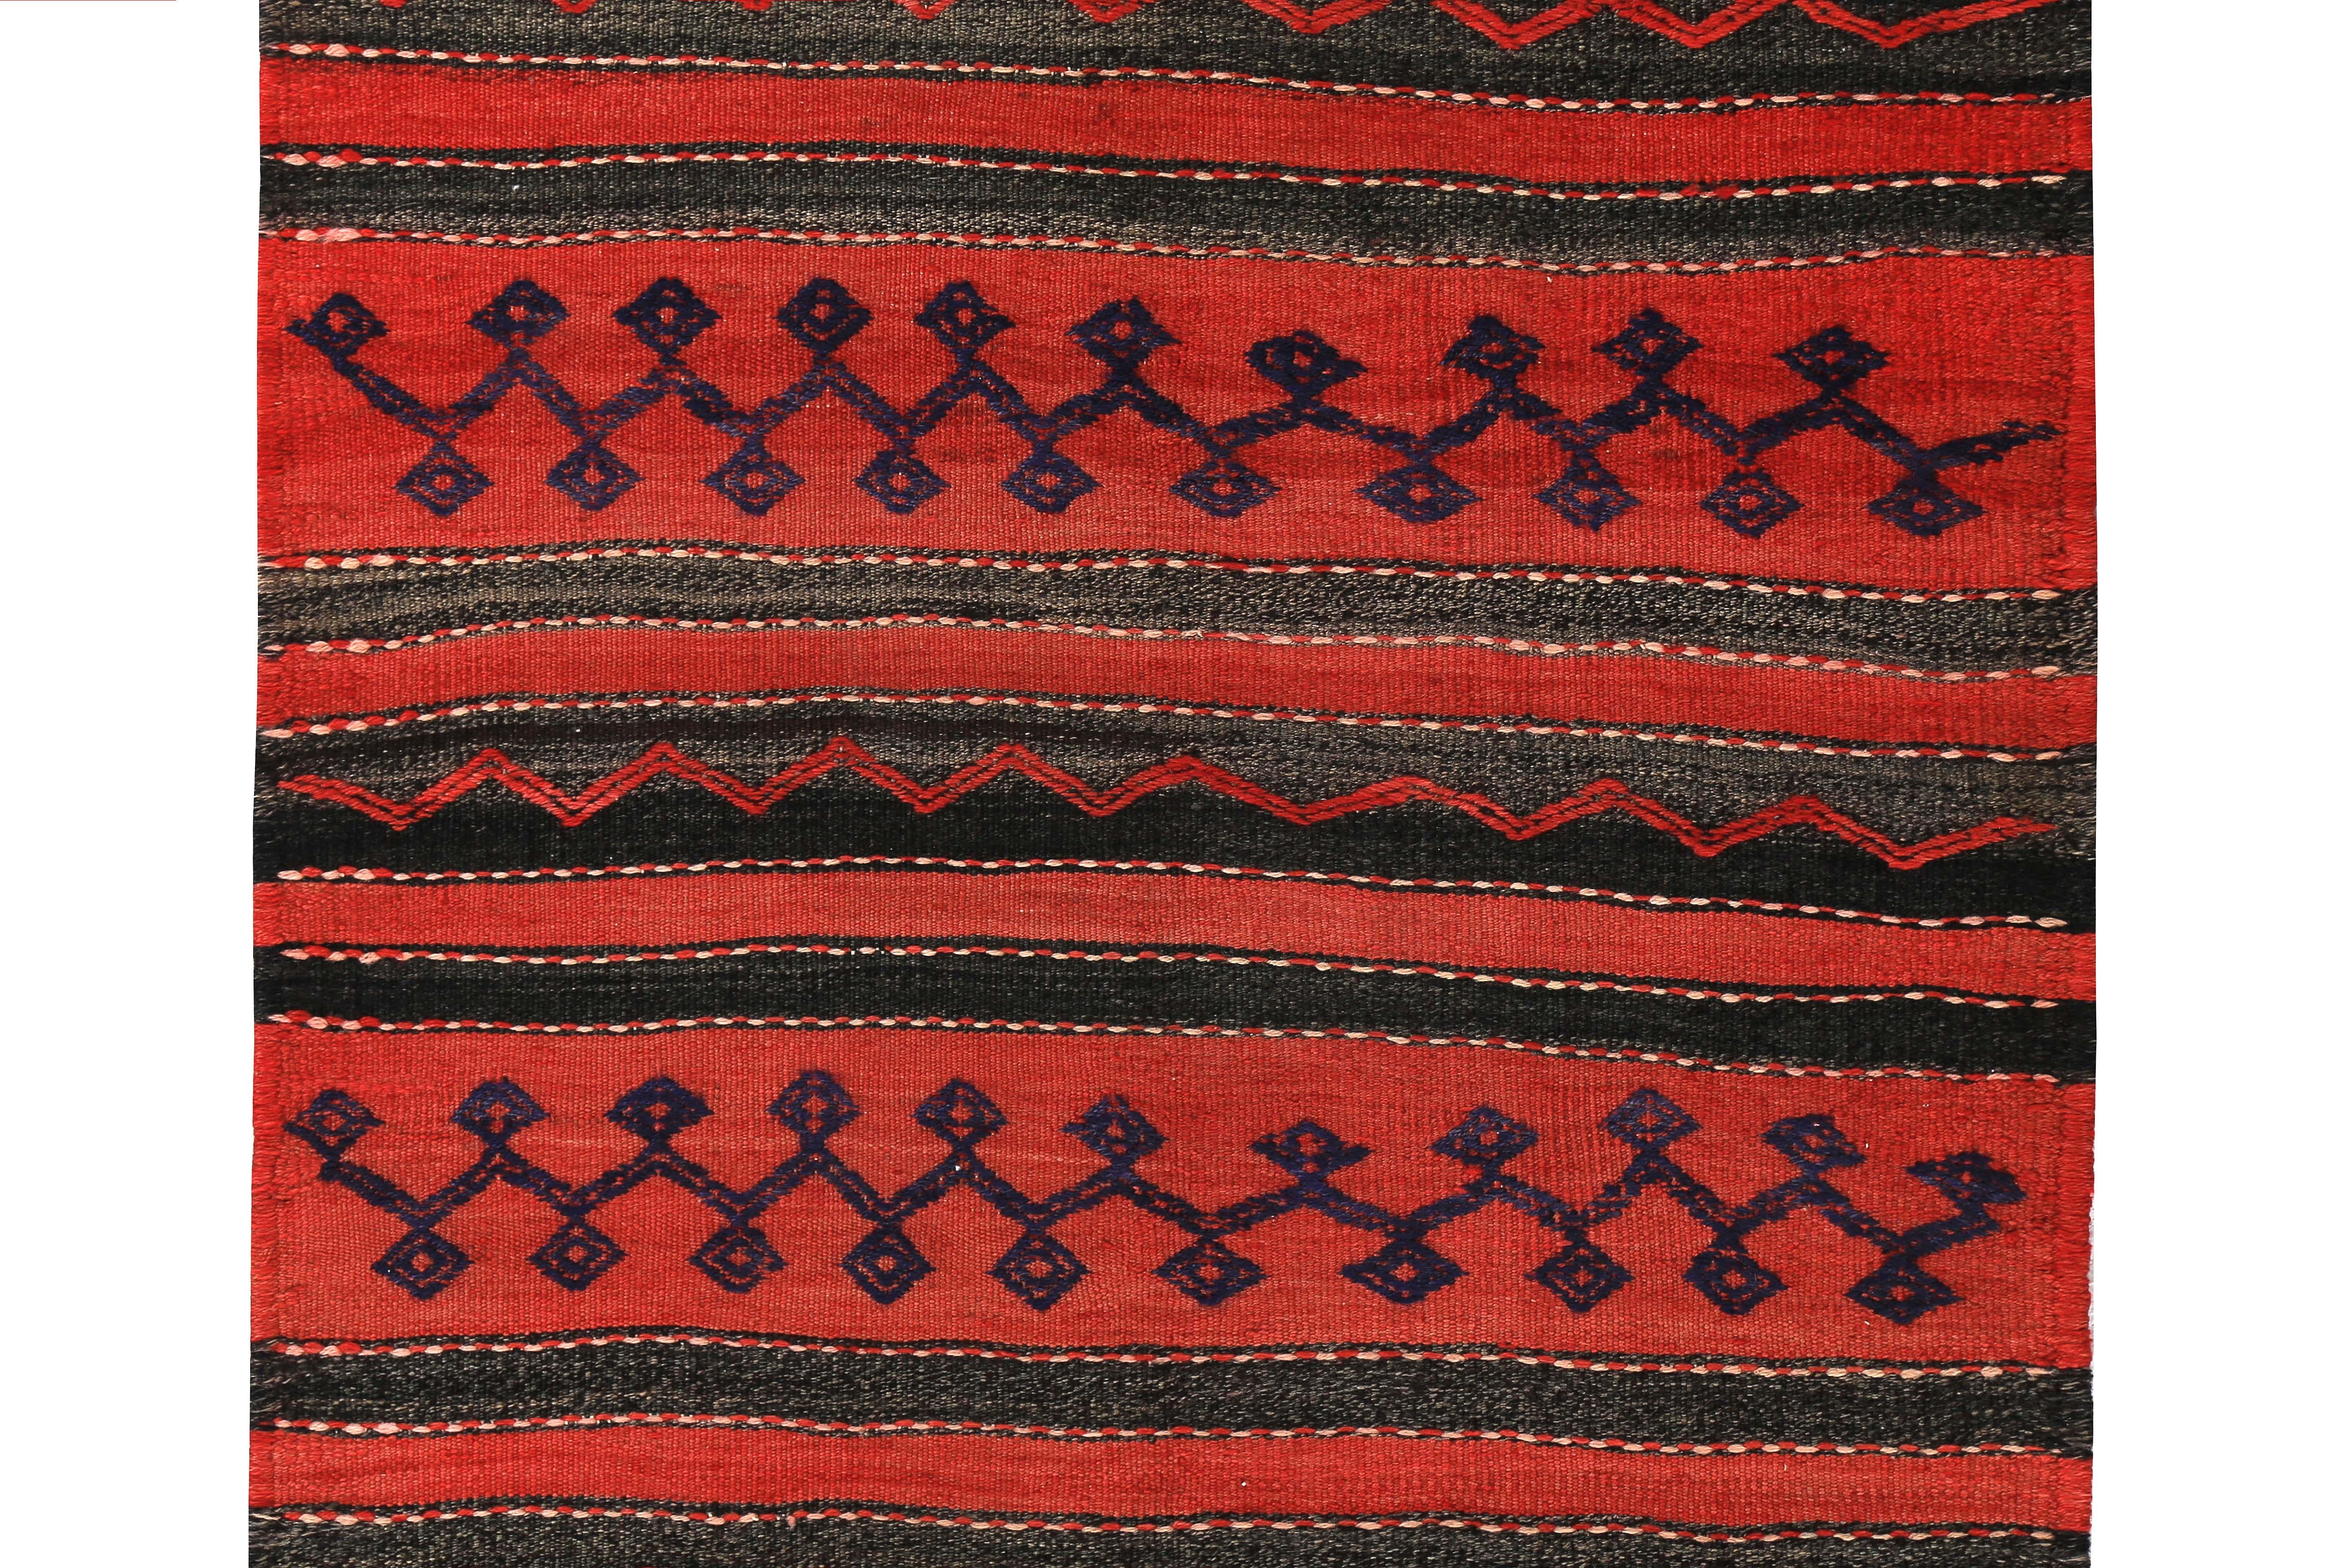 Hand-Woven Turkish Kilim Rug in Red Black and Tribal Stripes in Navy For Sale